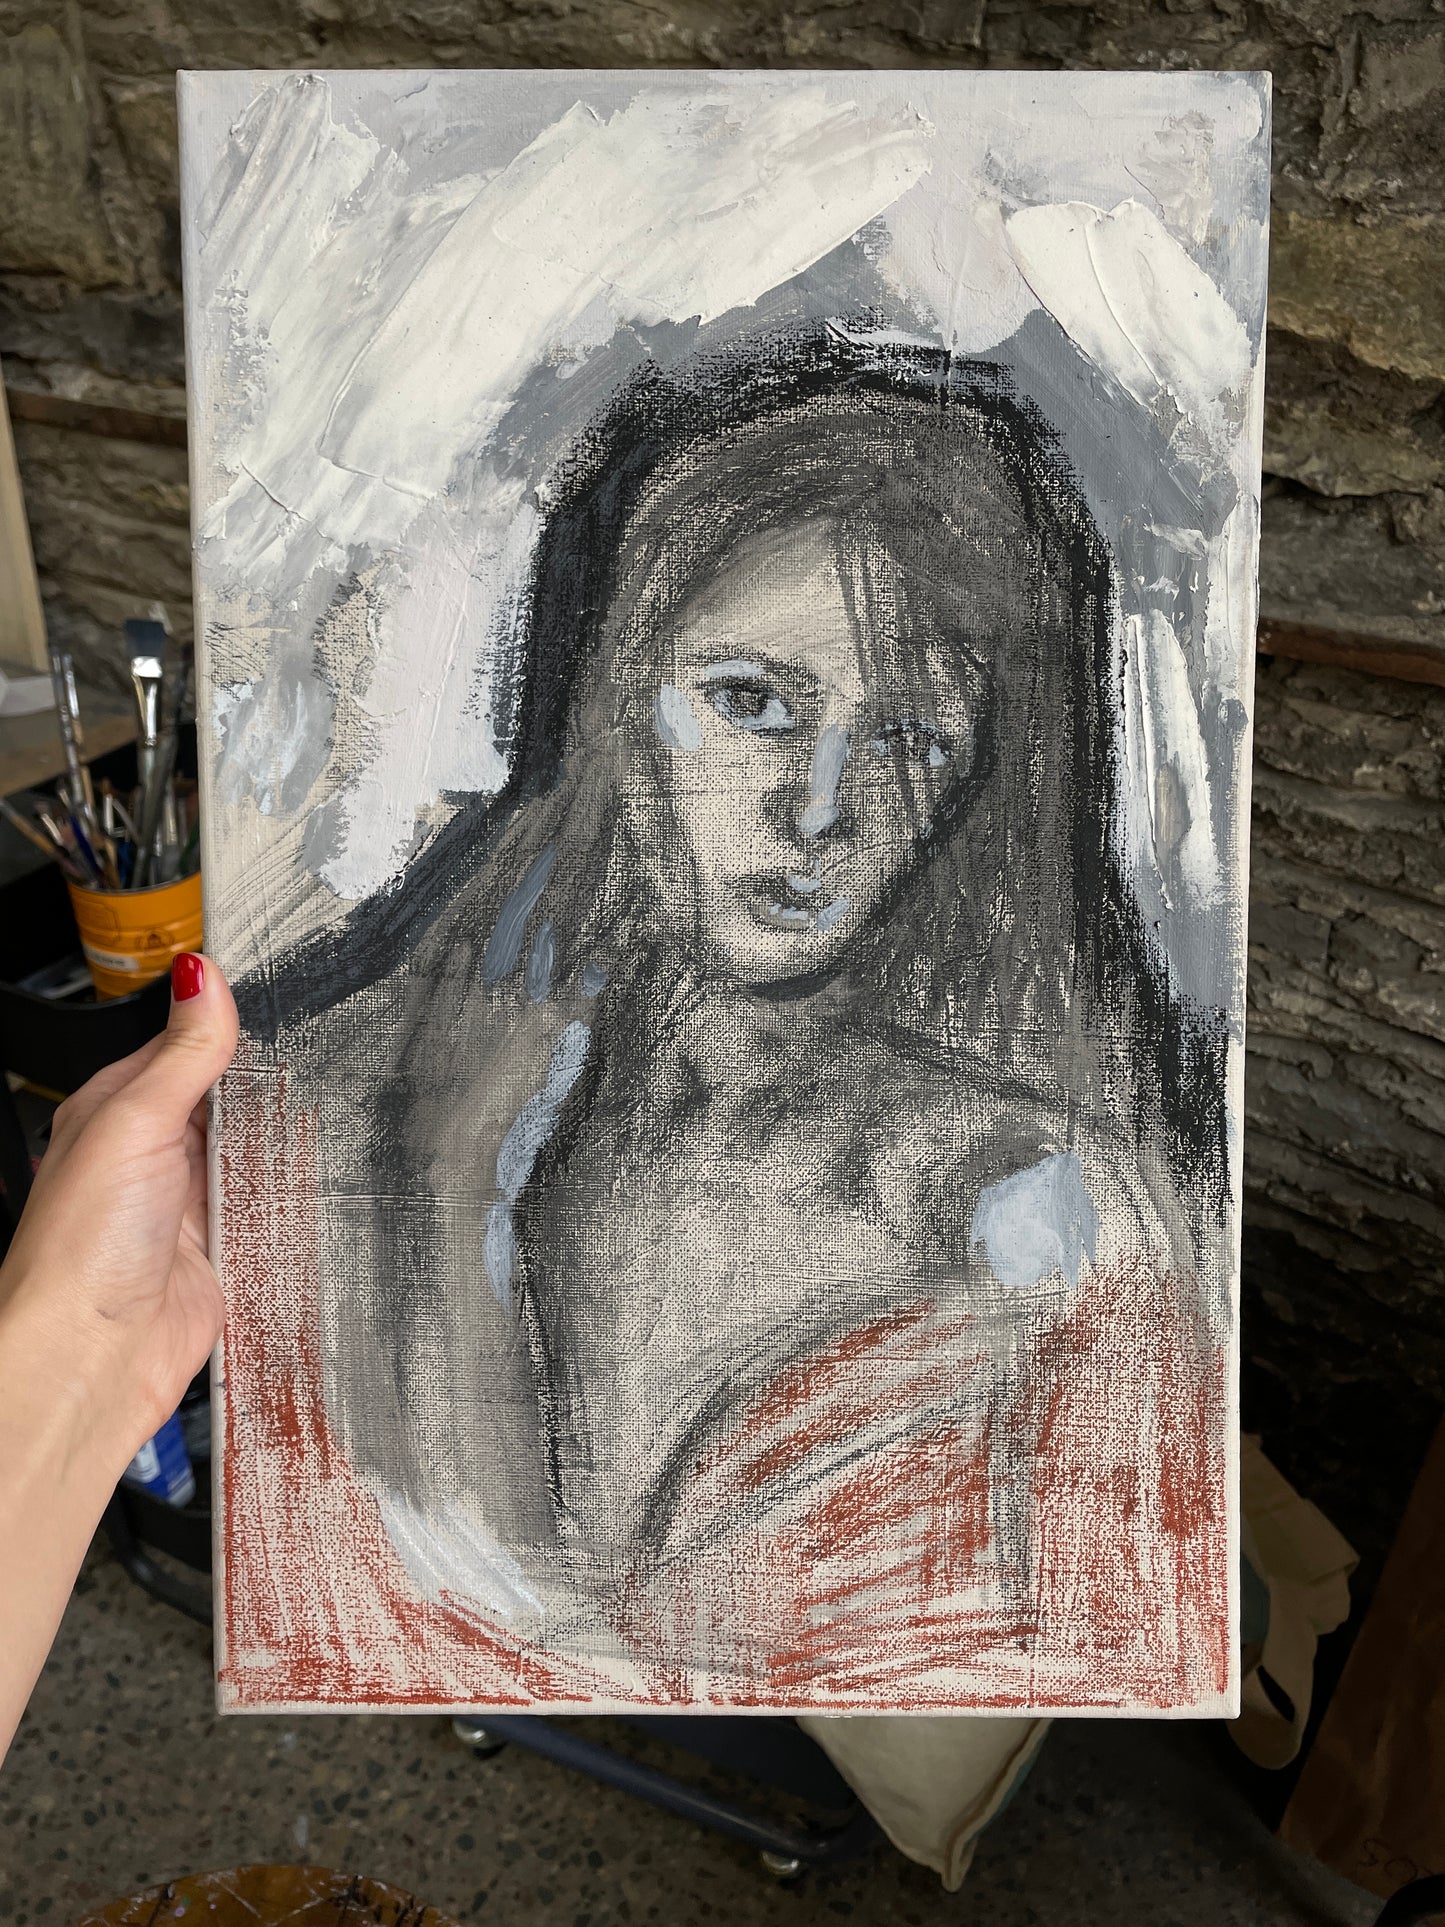 The charcoal portrait. Mixed media on stretched canvas.